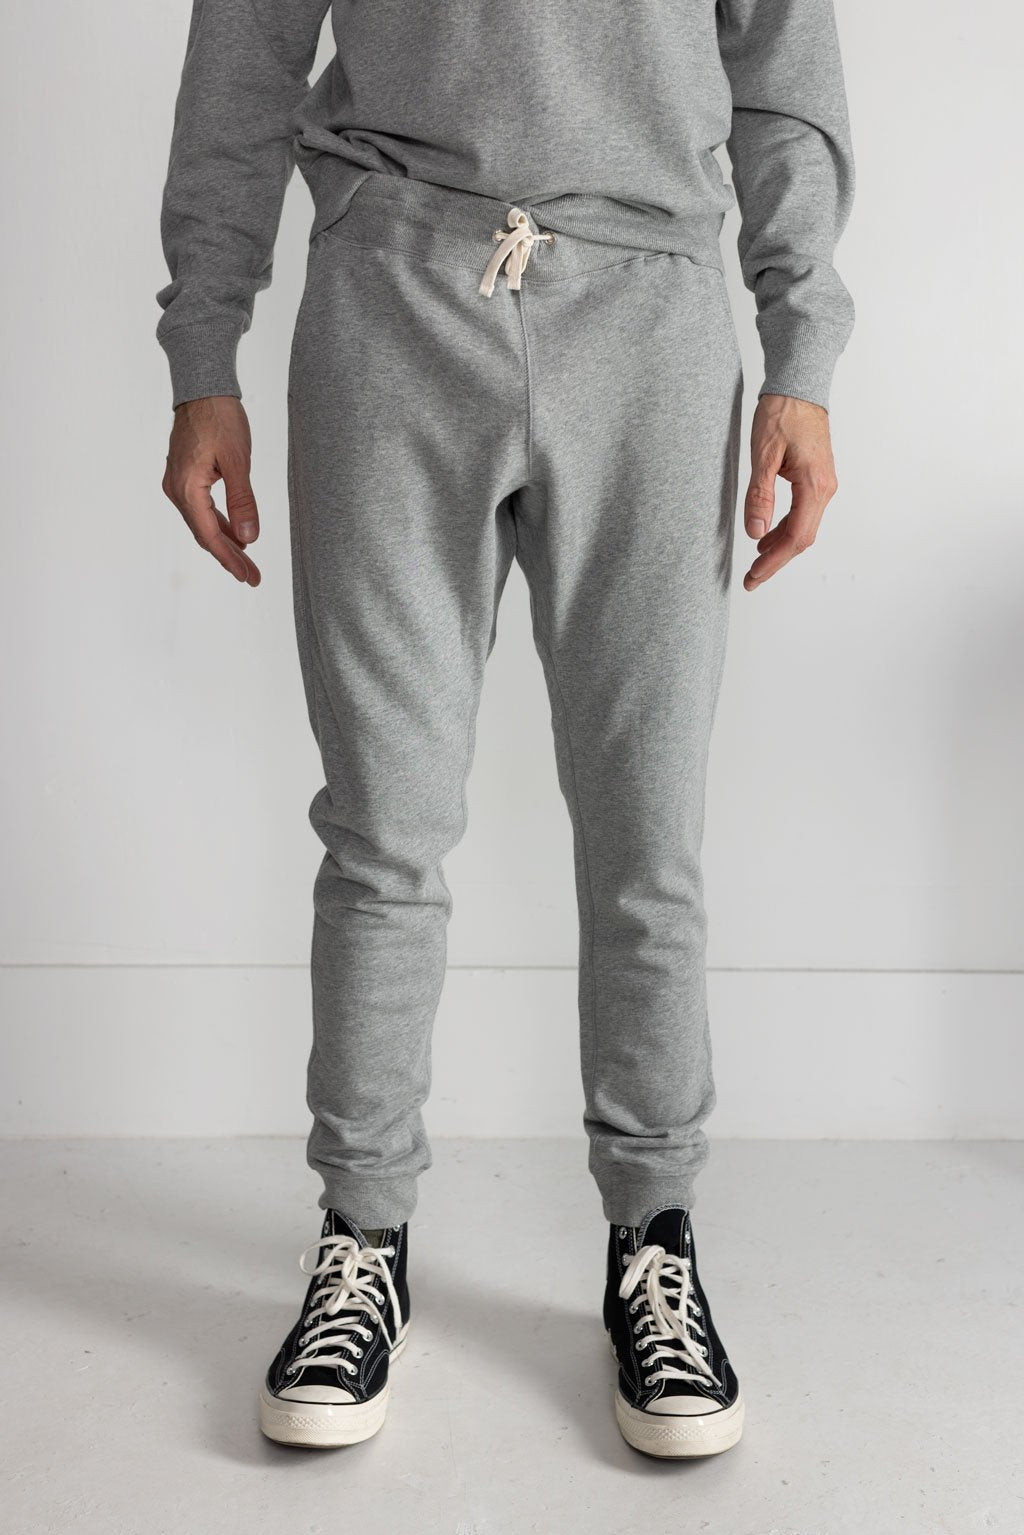 NS2167-3 250g French Terry Sweatpants in Melange Grey – National